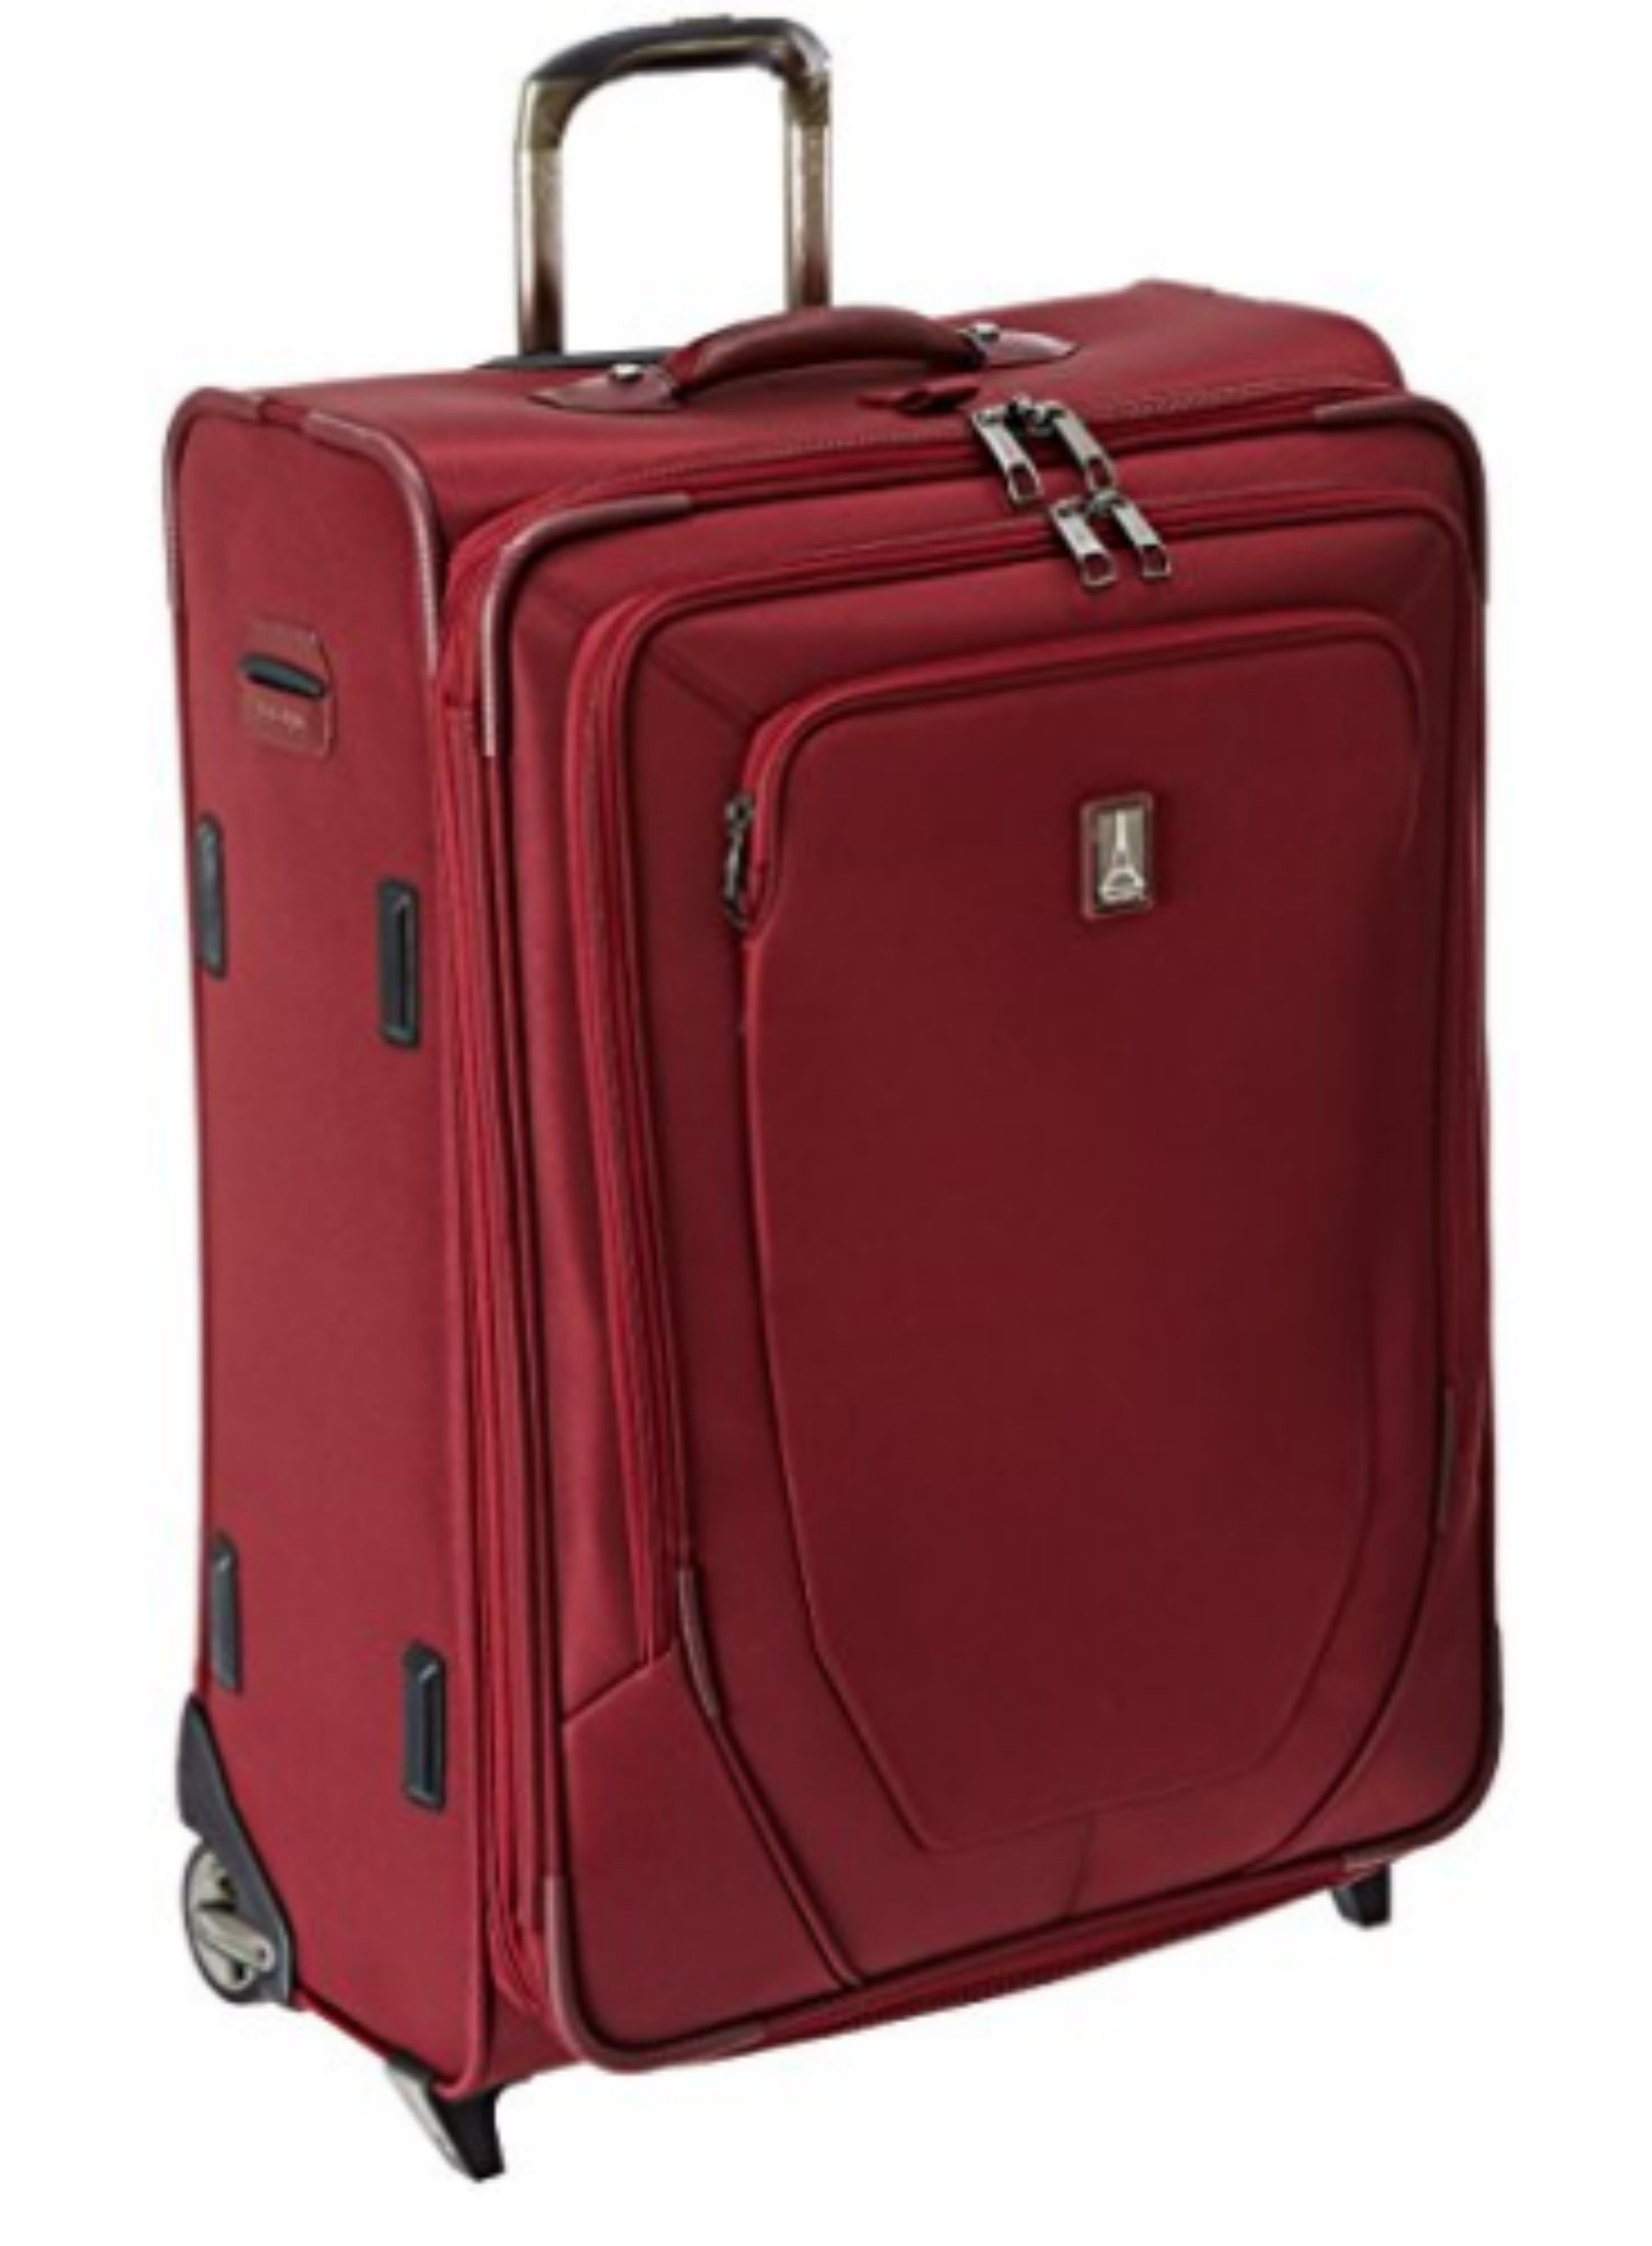 travel luggage to buy